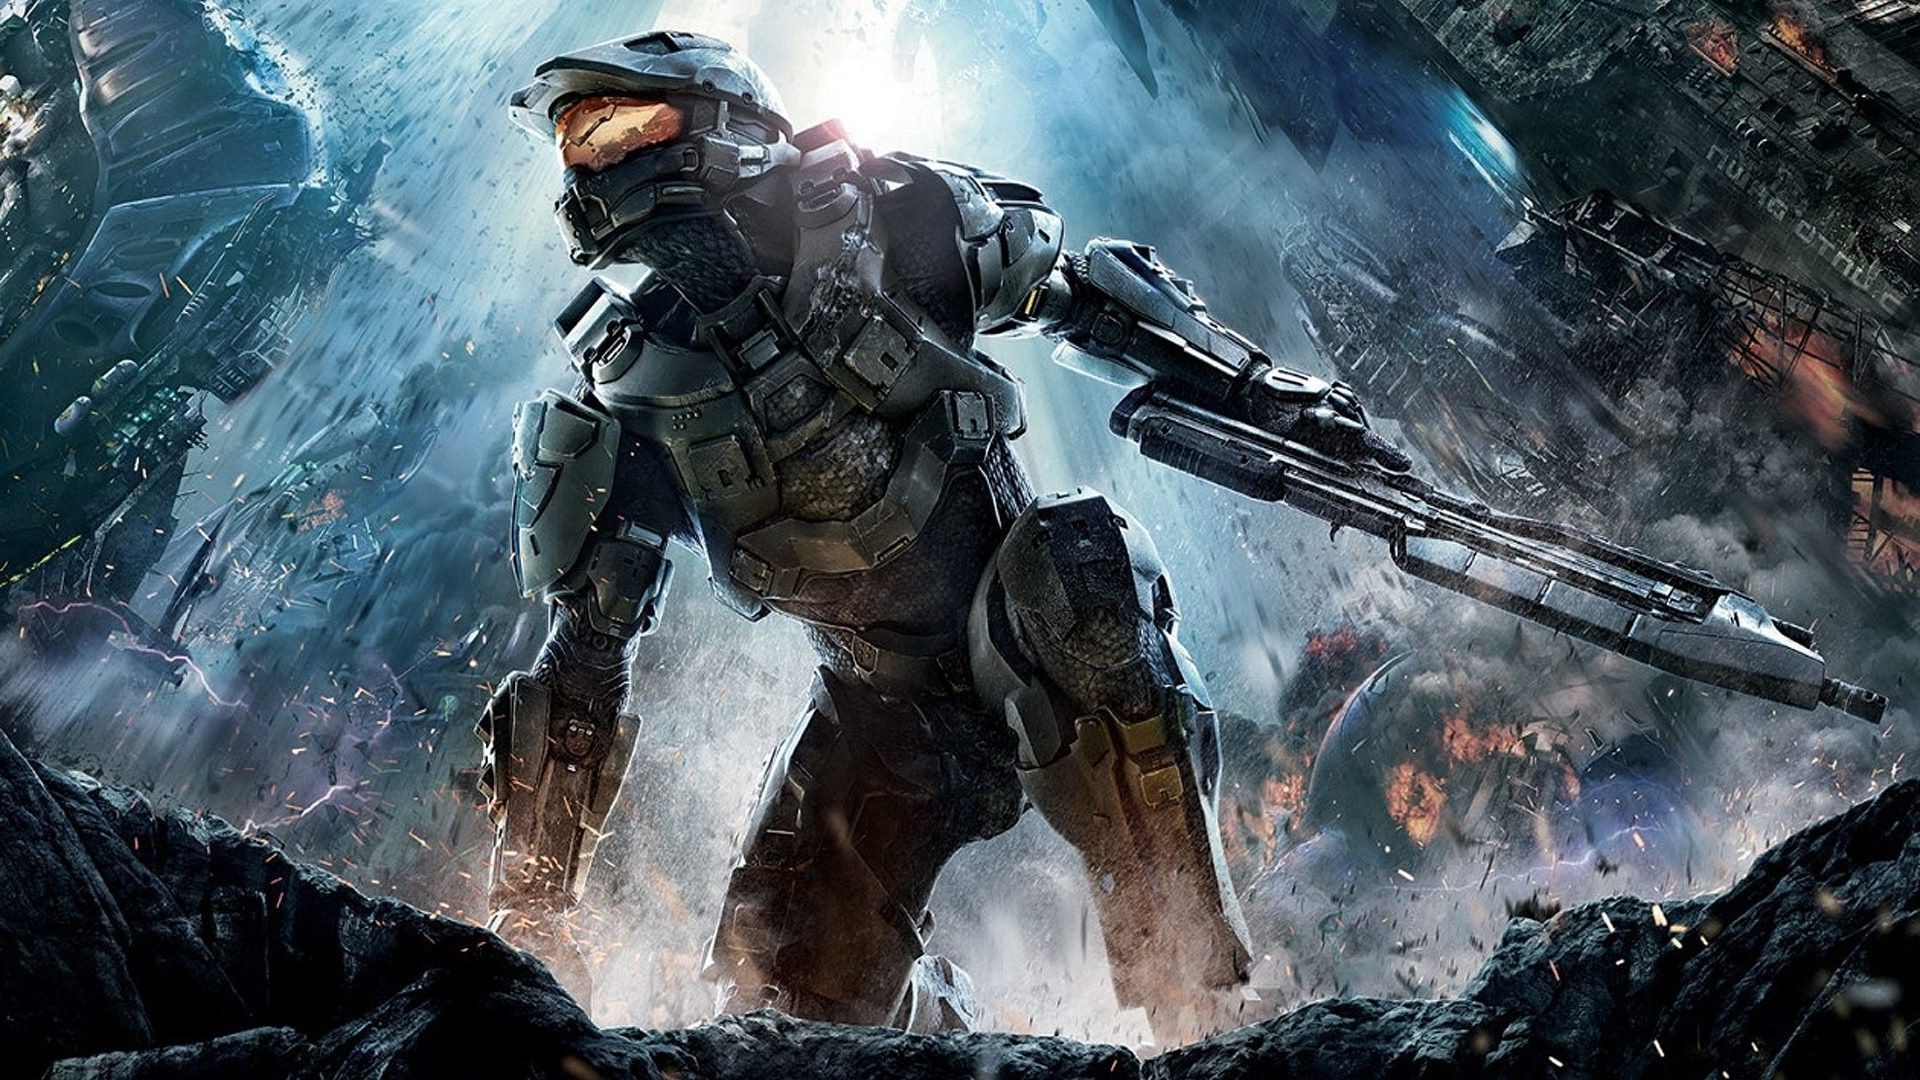 1920x1080 Halo 4 Wallpapers | Full HD Backgrounds